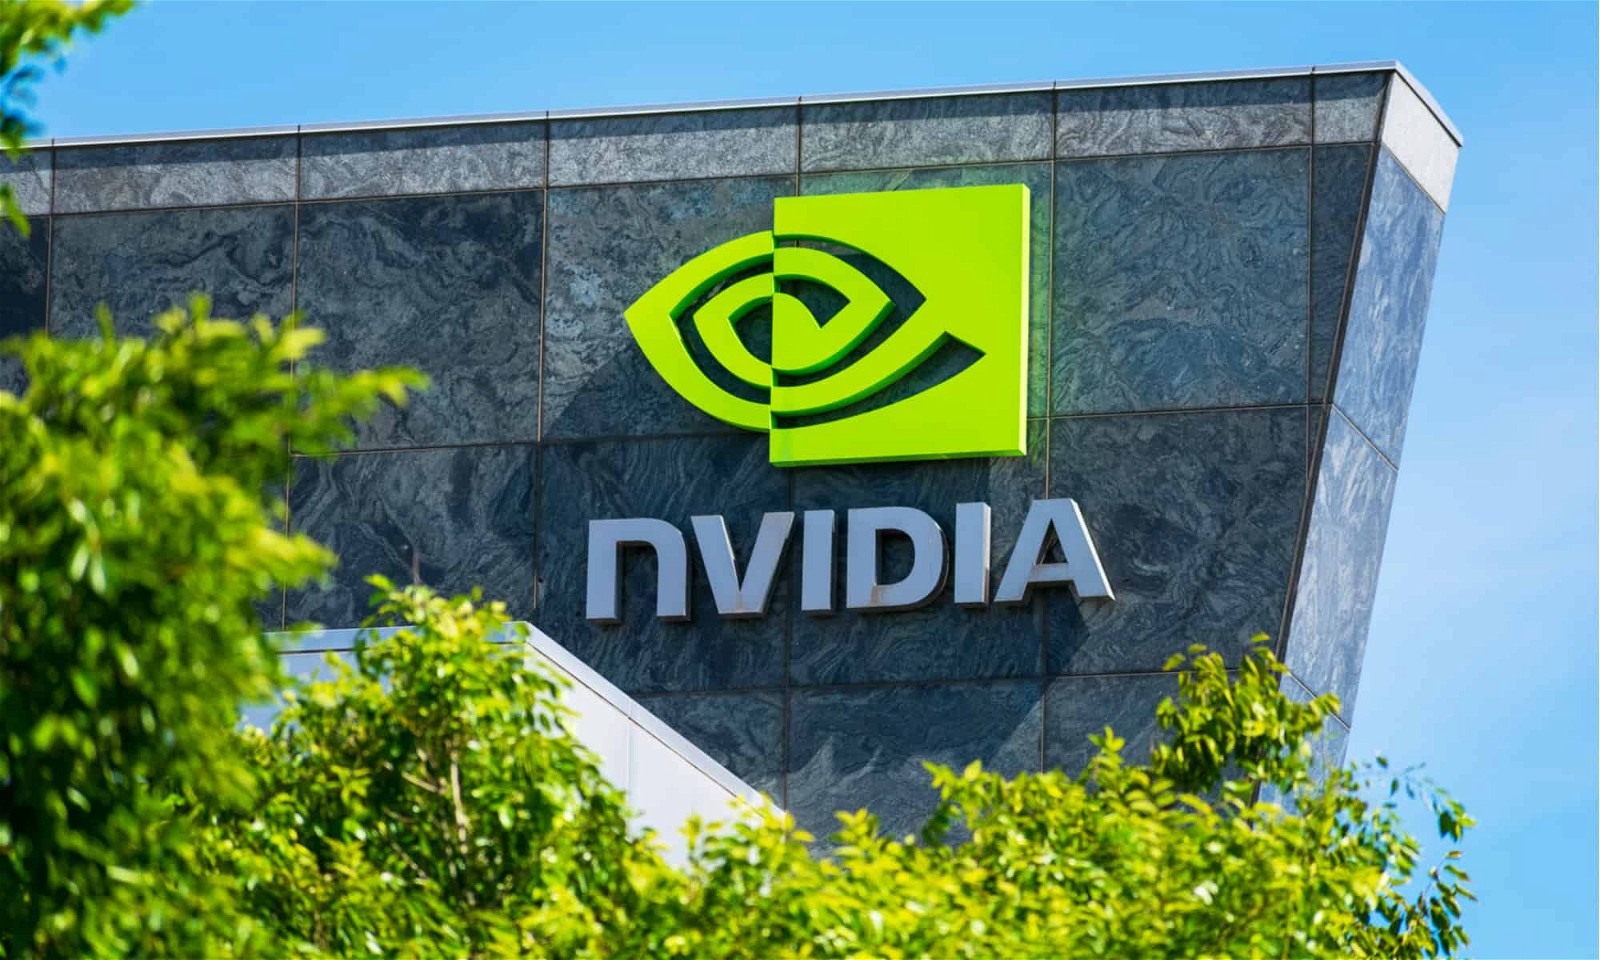 NVIDIA Corporation is an American technology company specializing in the design and development of GPUs